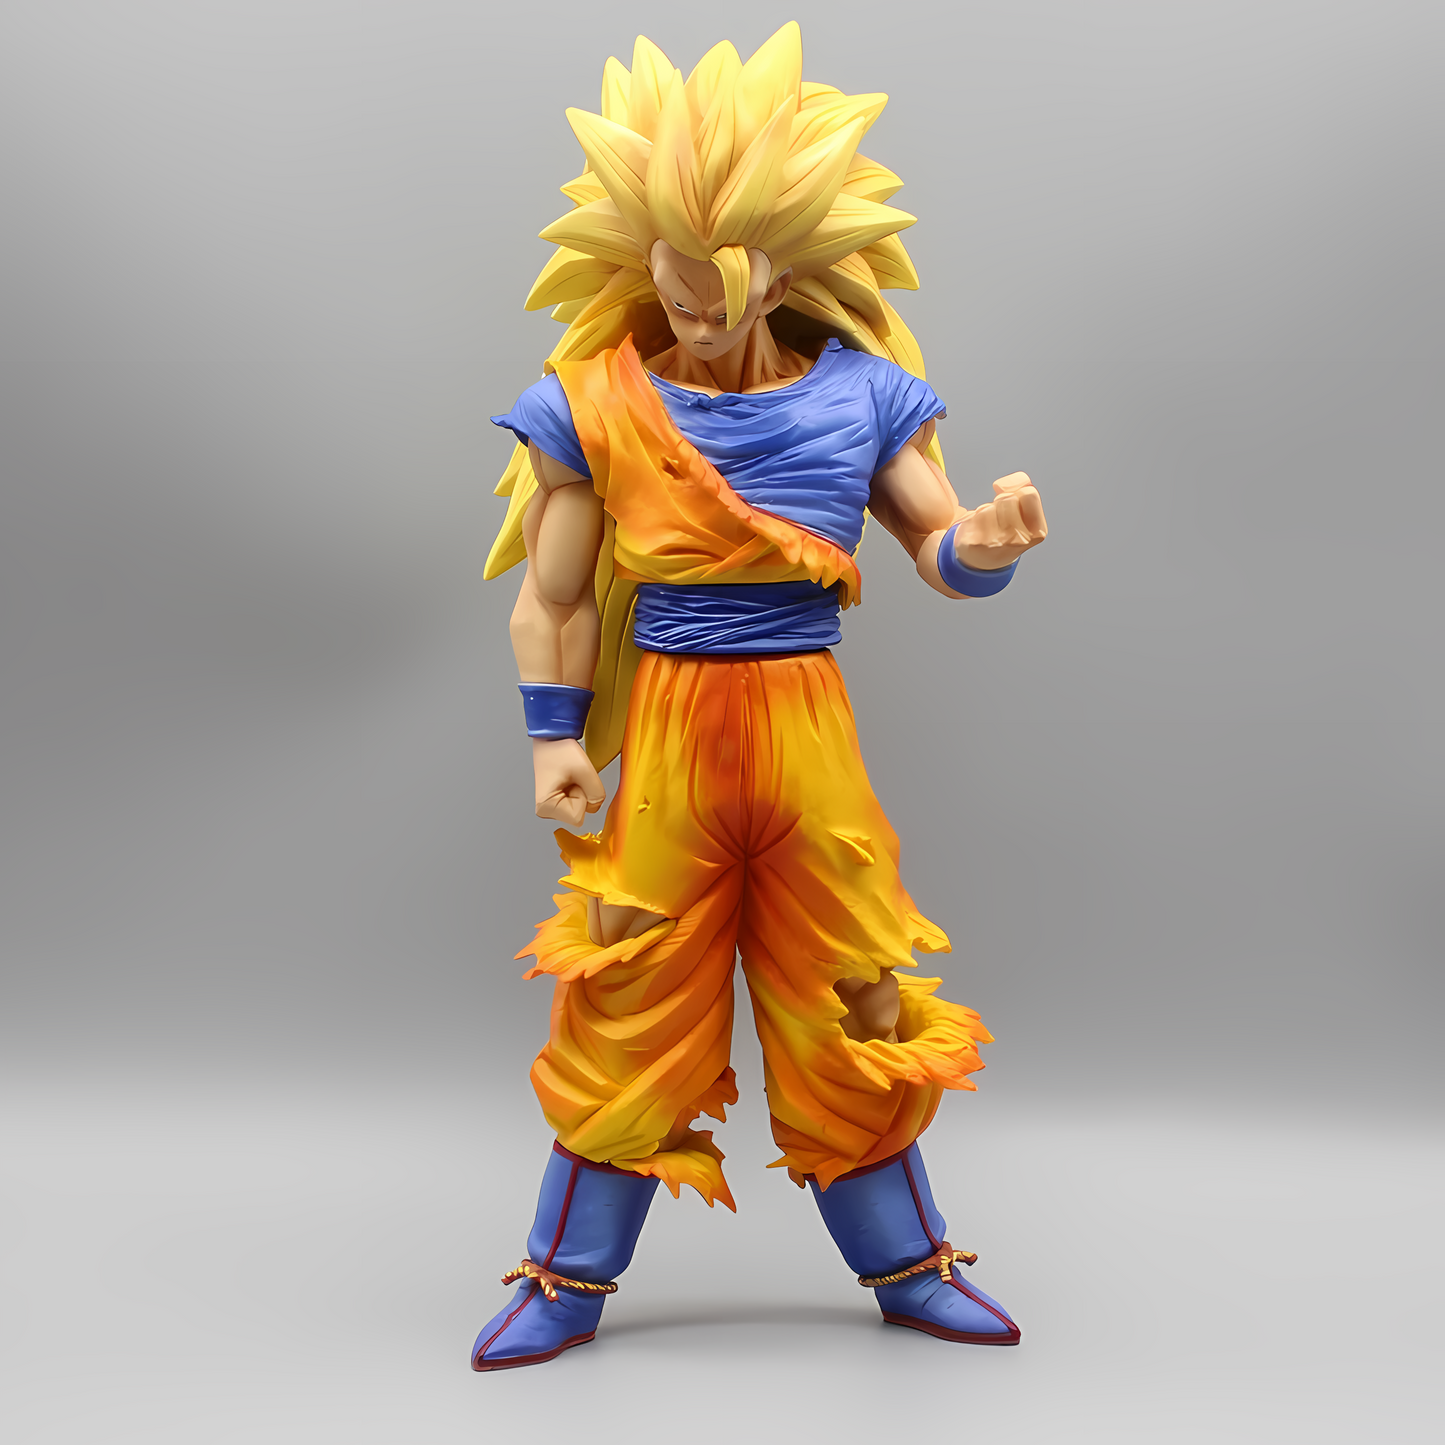 Collectible figure of Goku from Dragon Ball, named 'Ascendant Fury Goku,' depicted in a Super Saiyan form with a flowing orange and blue outfit.